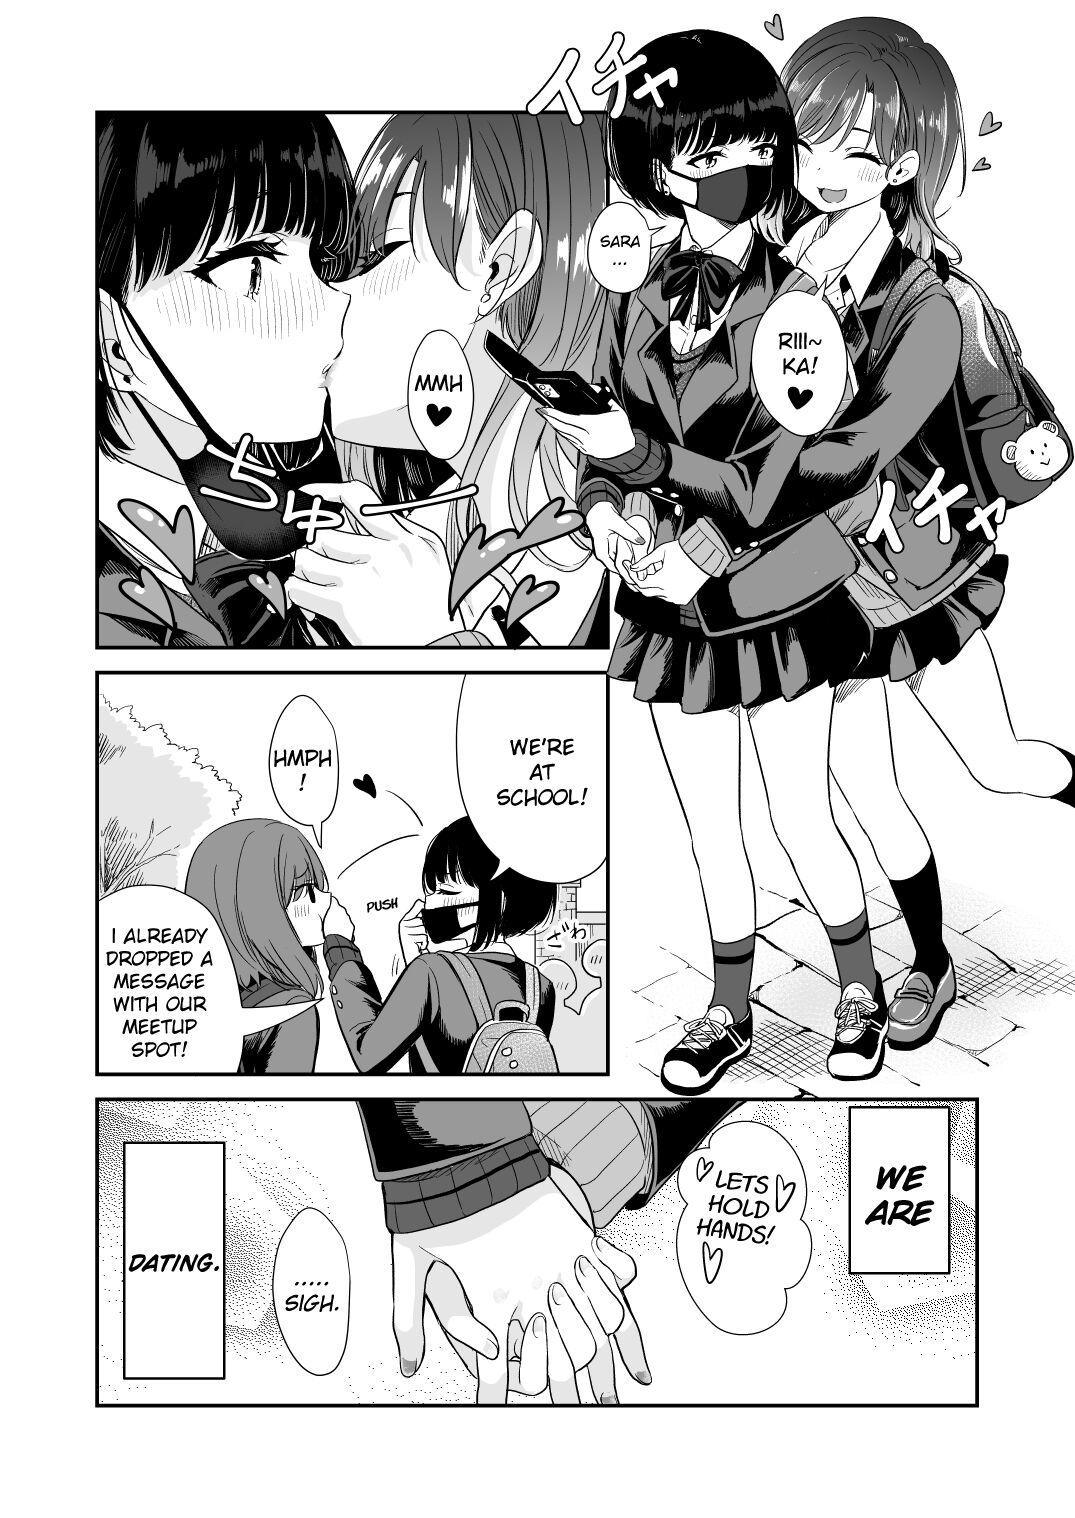 People Having Sex Kyou Oya, Inai kara | My Parents Aren't Home Today, So... Perra - Page 4